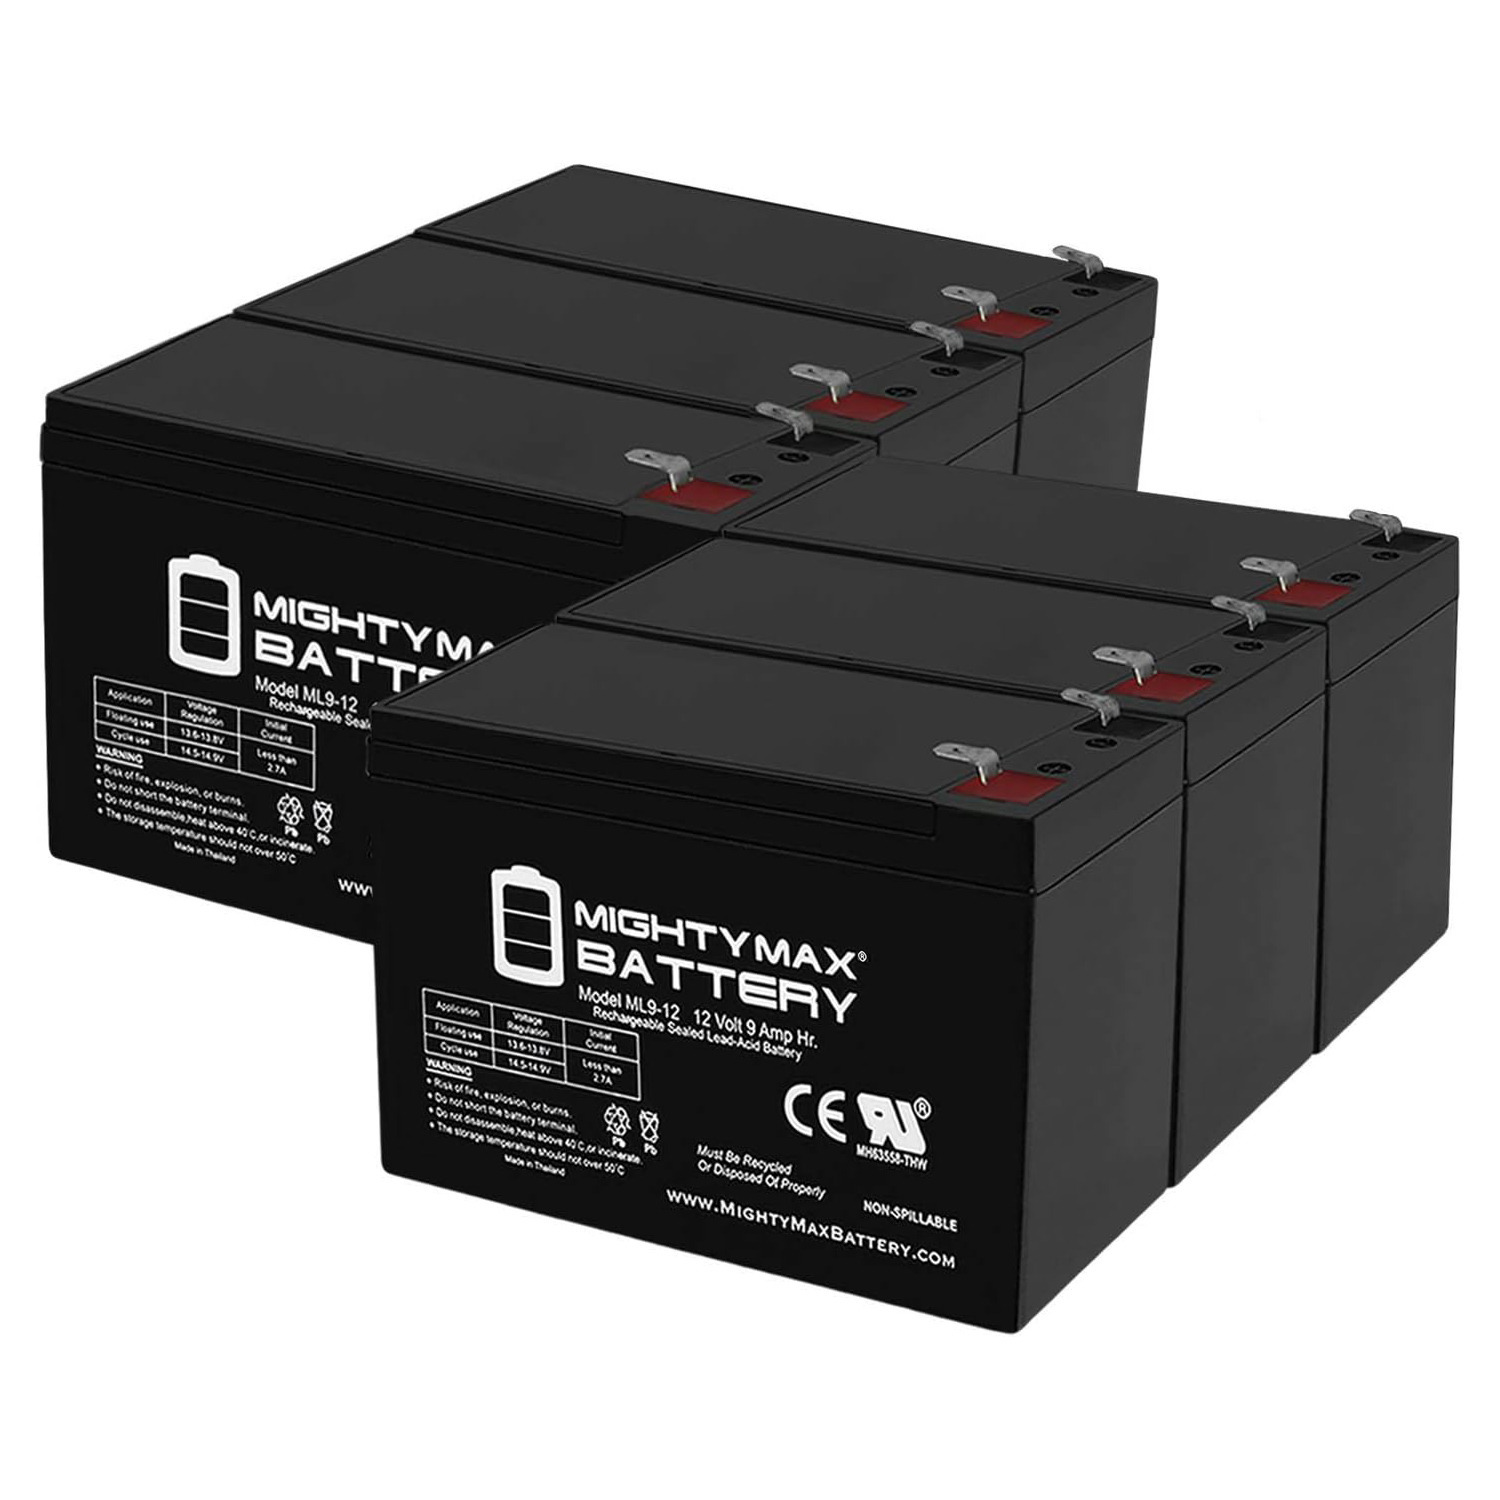 Altronix SMP3PMCTXPD4 12V, 9Ah Lead Acid Battery - 6 Pack